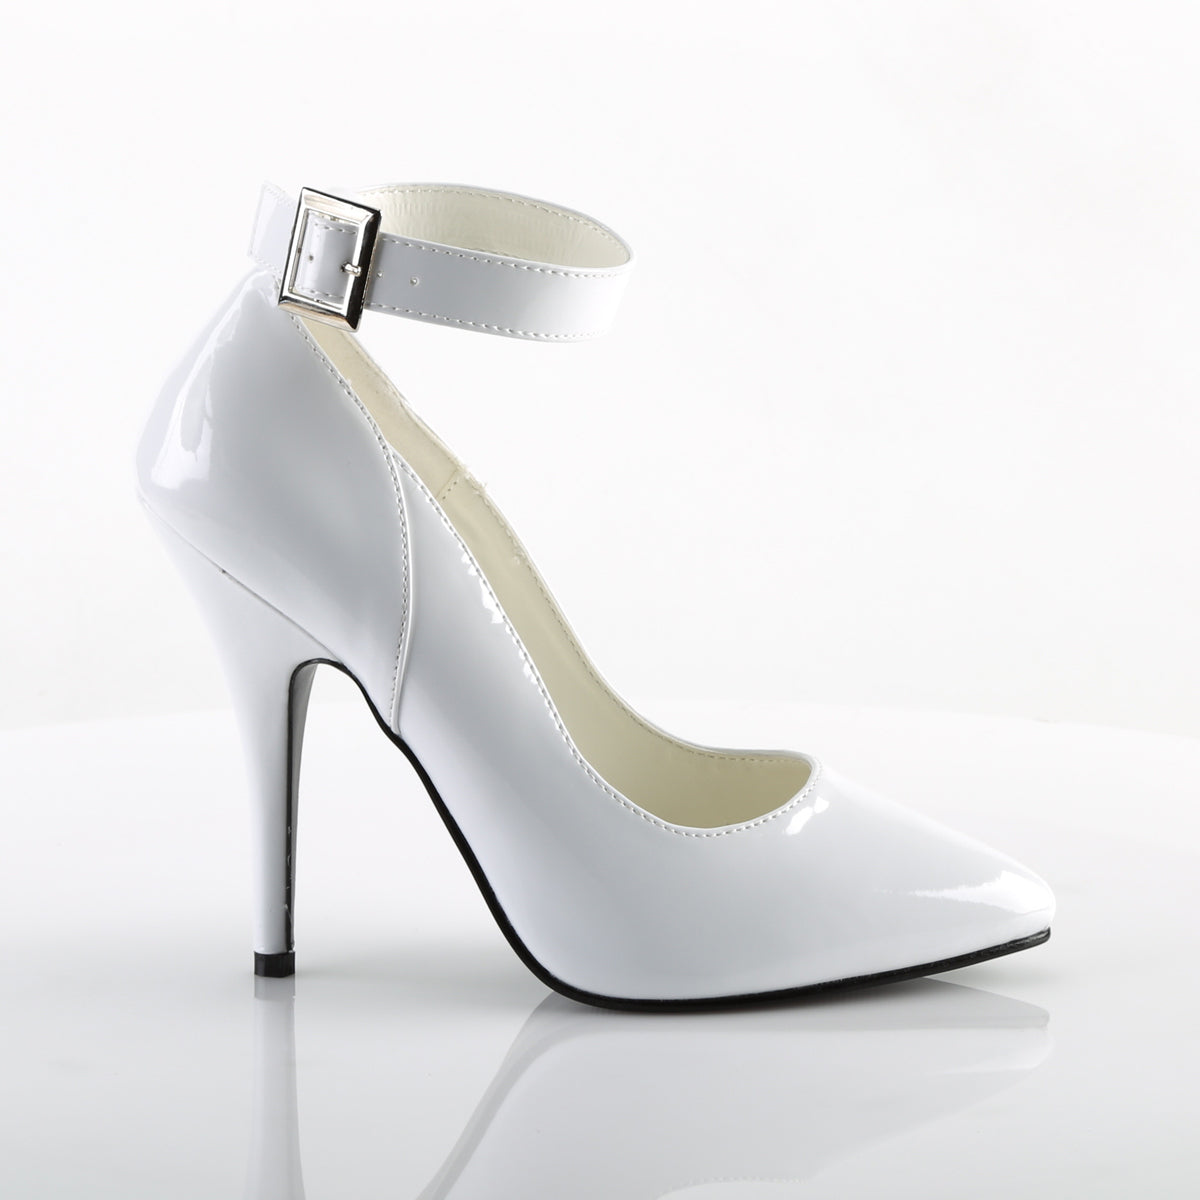 SEDUCE-431 Sexy Shoes 5" Heel White Patent Fetish Footwear-Pleaser- Sexy Shoes Fetish Heels